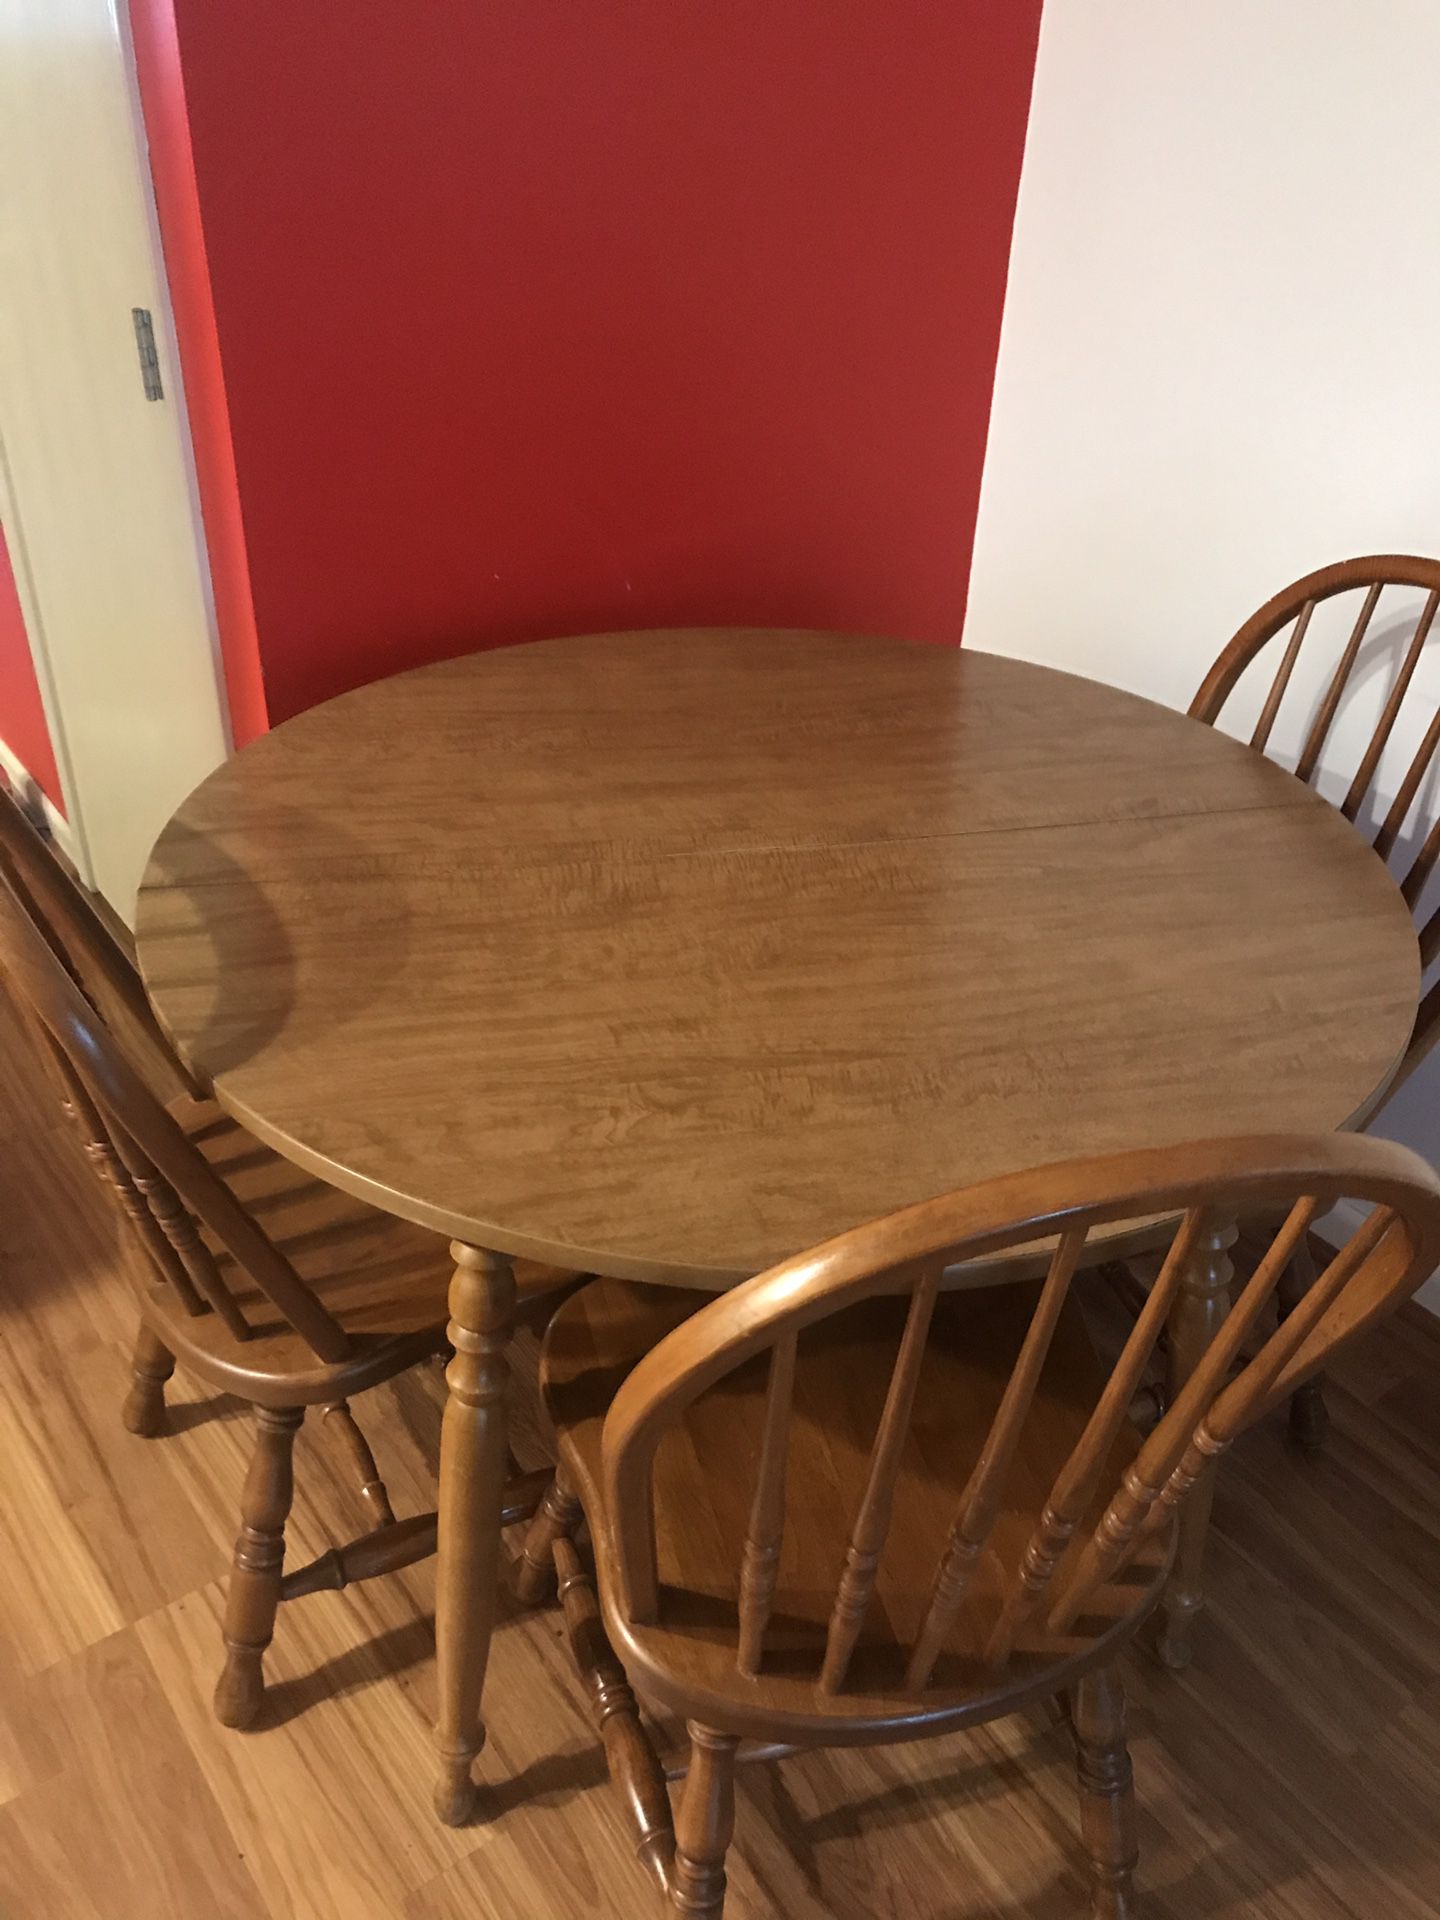 Kitchen dining table and chairs